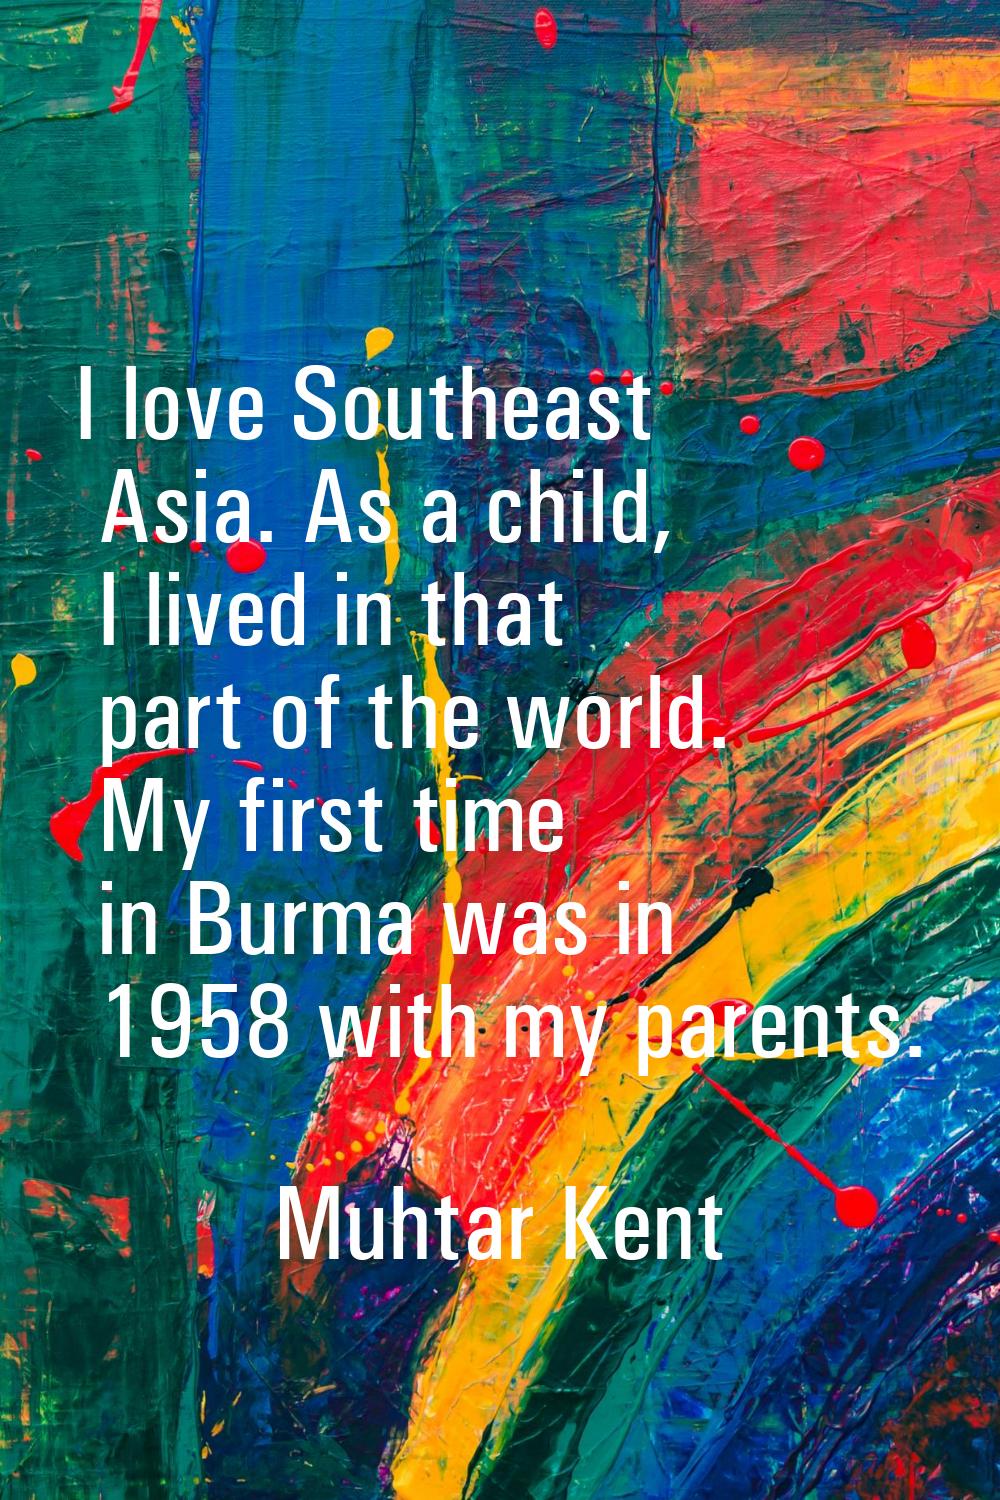 I love Southeast Asia. As a child, I lived in that part of the world. My first time in Burma was in